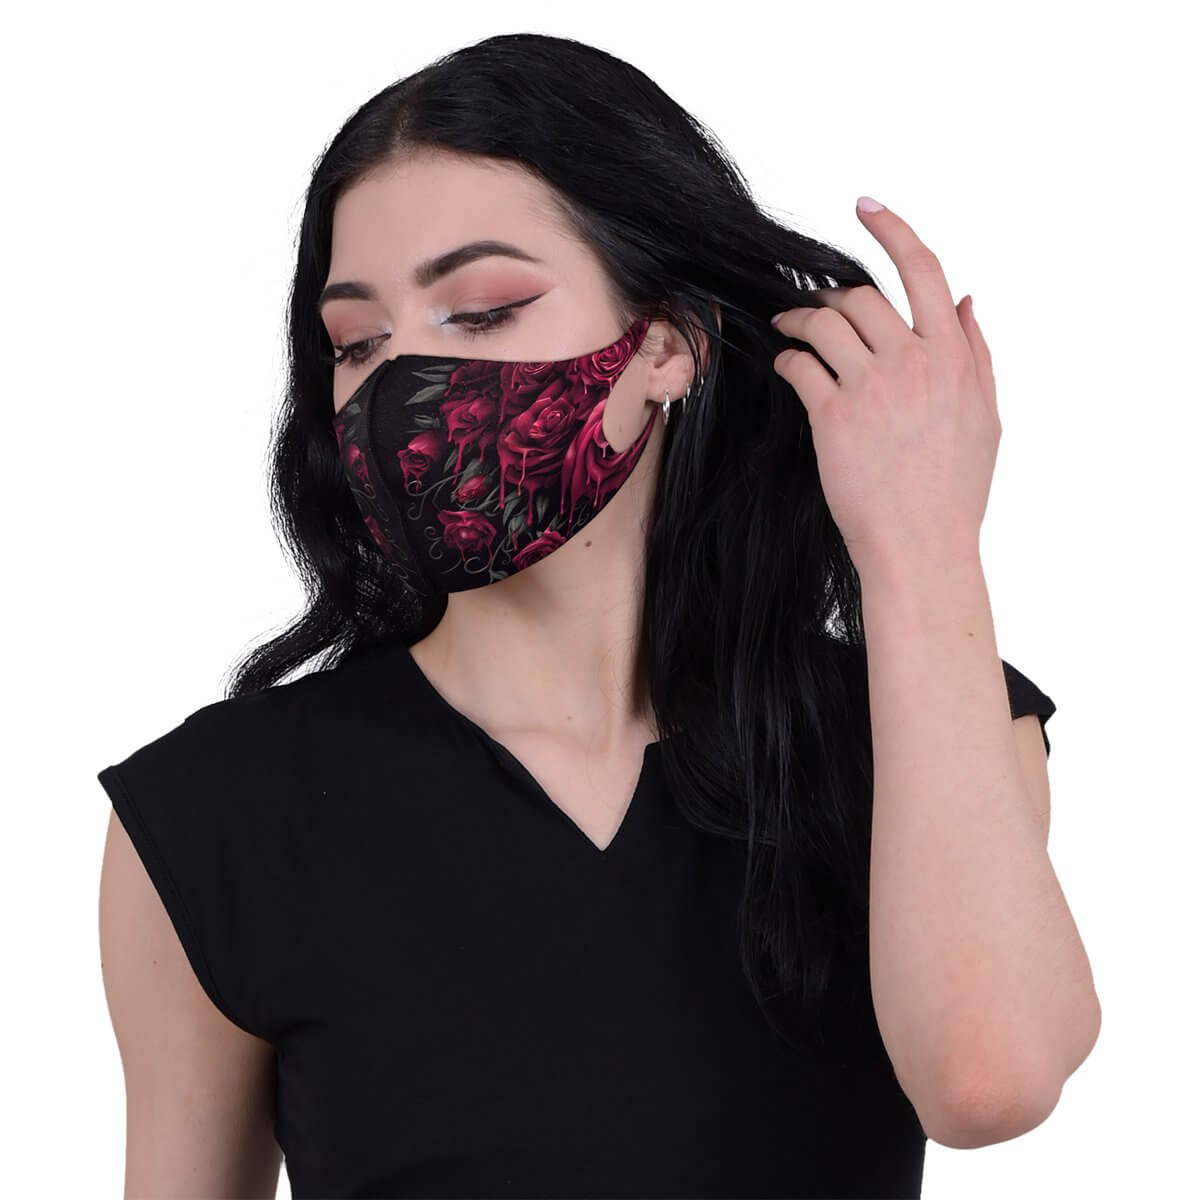 blood rose gothic face mask